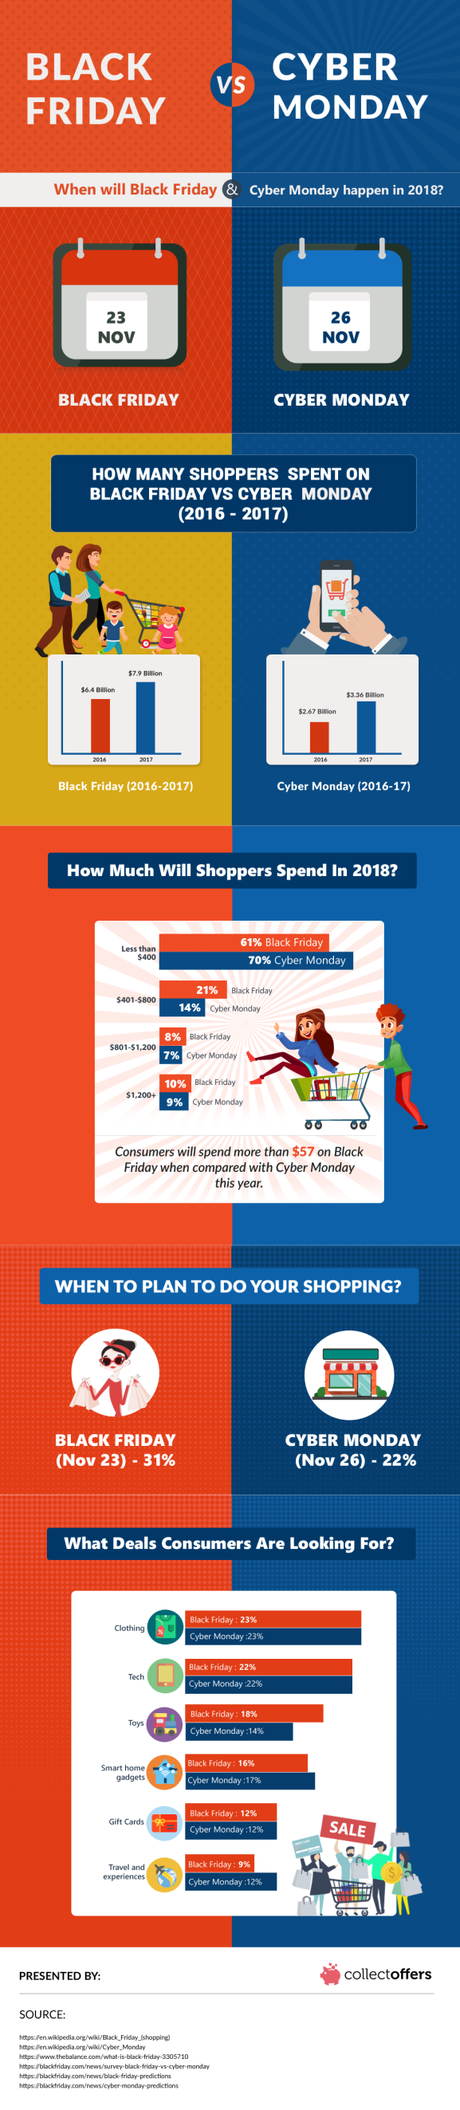 Is It Better To Shop On Black Friday or Cyber Monday? – Know Here!